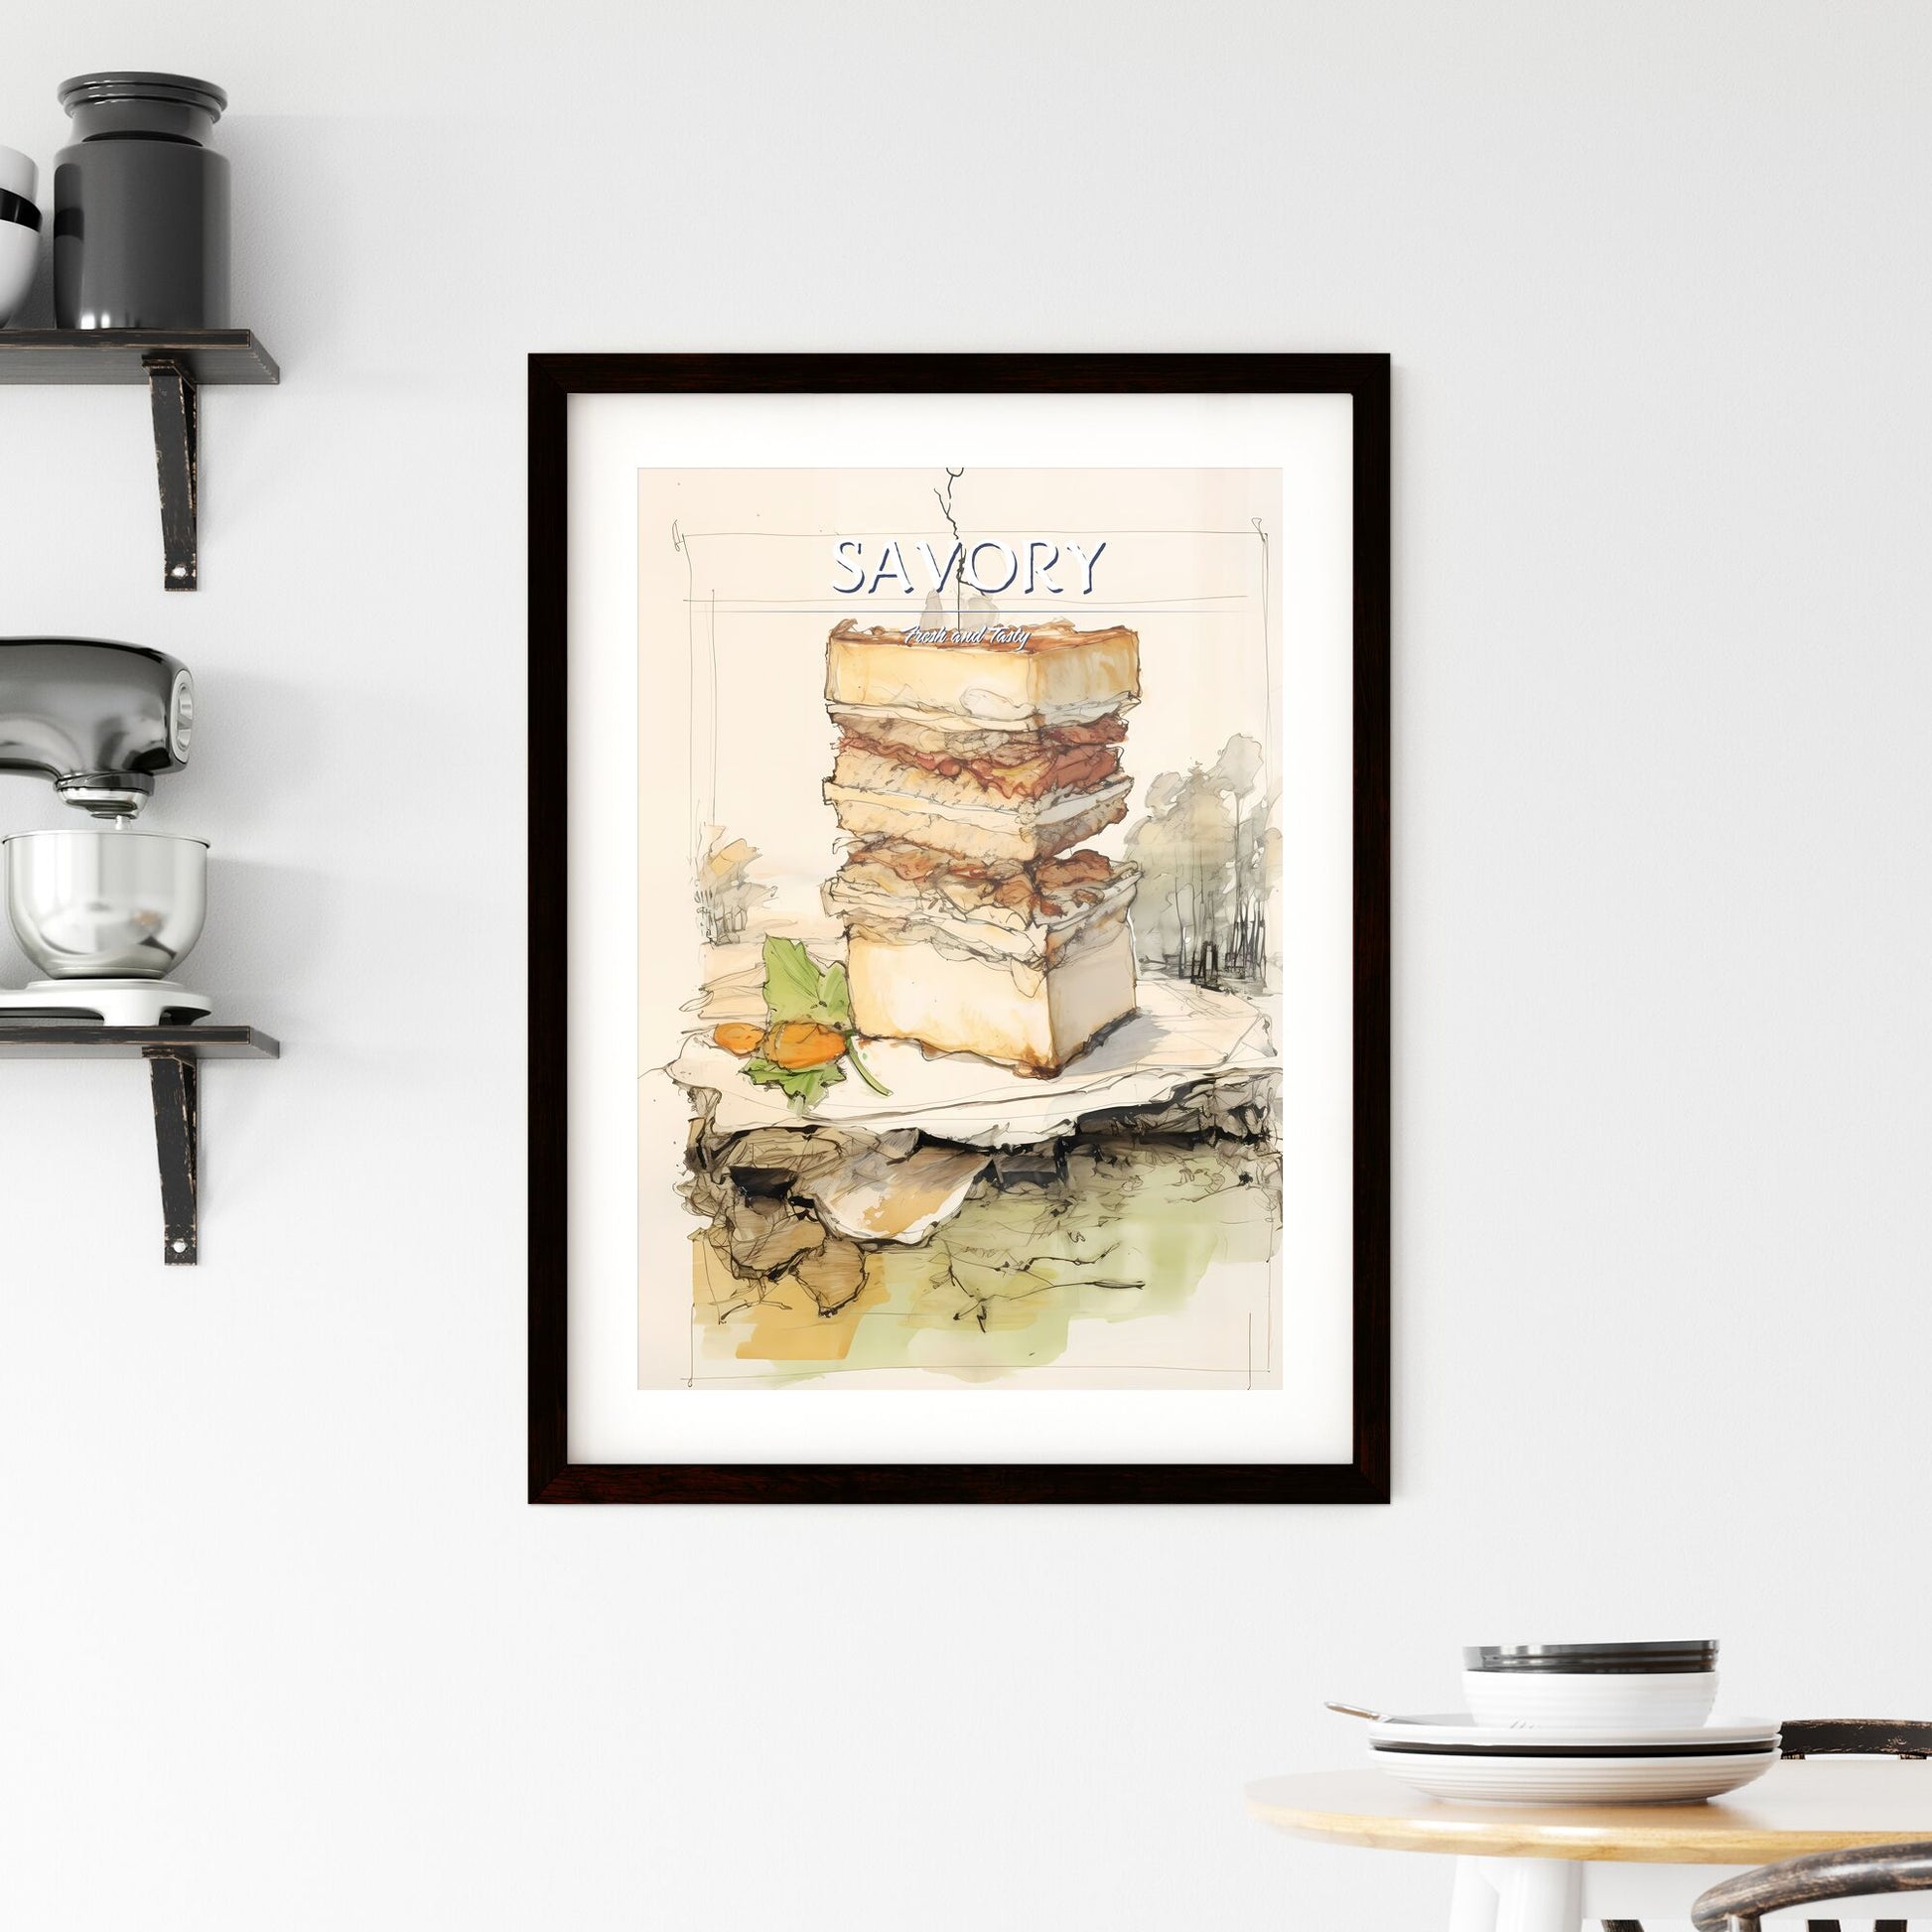 A Poster of illustration of a sandwich - A Painting Of A Sandwich Default Title